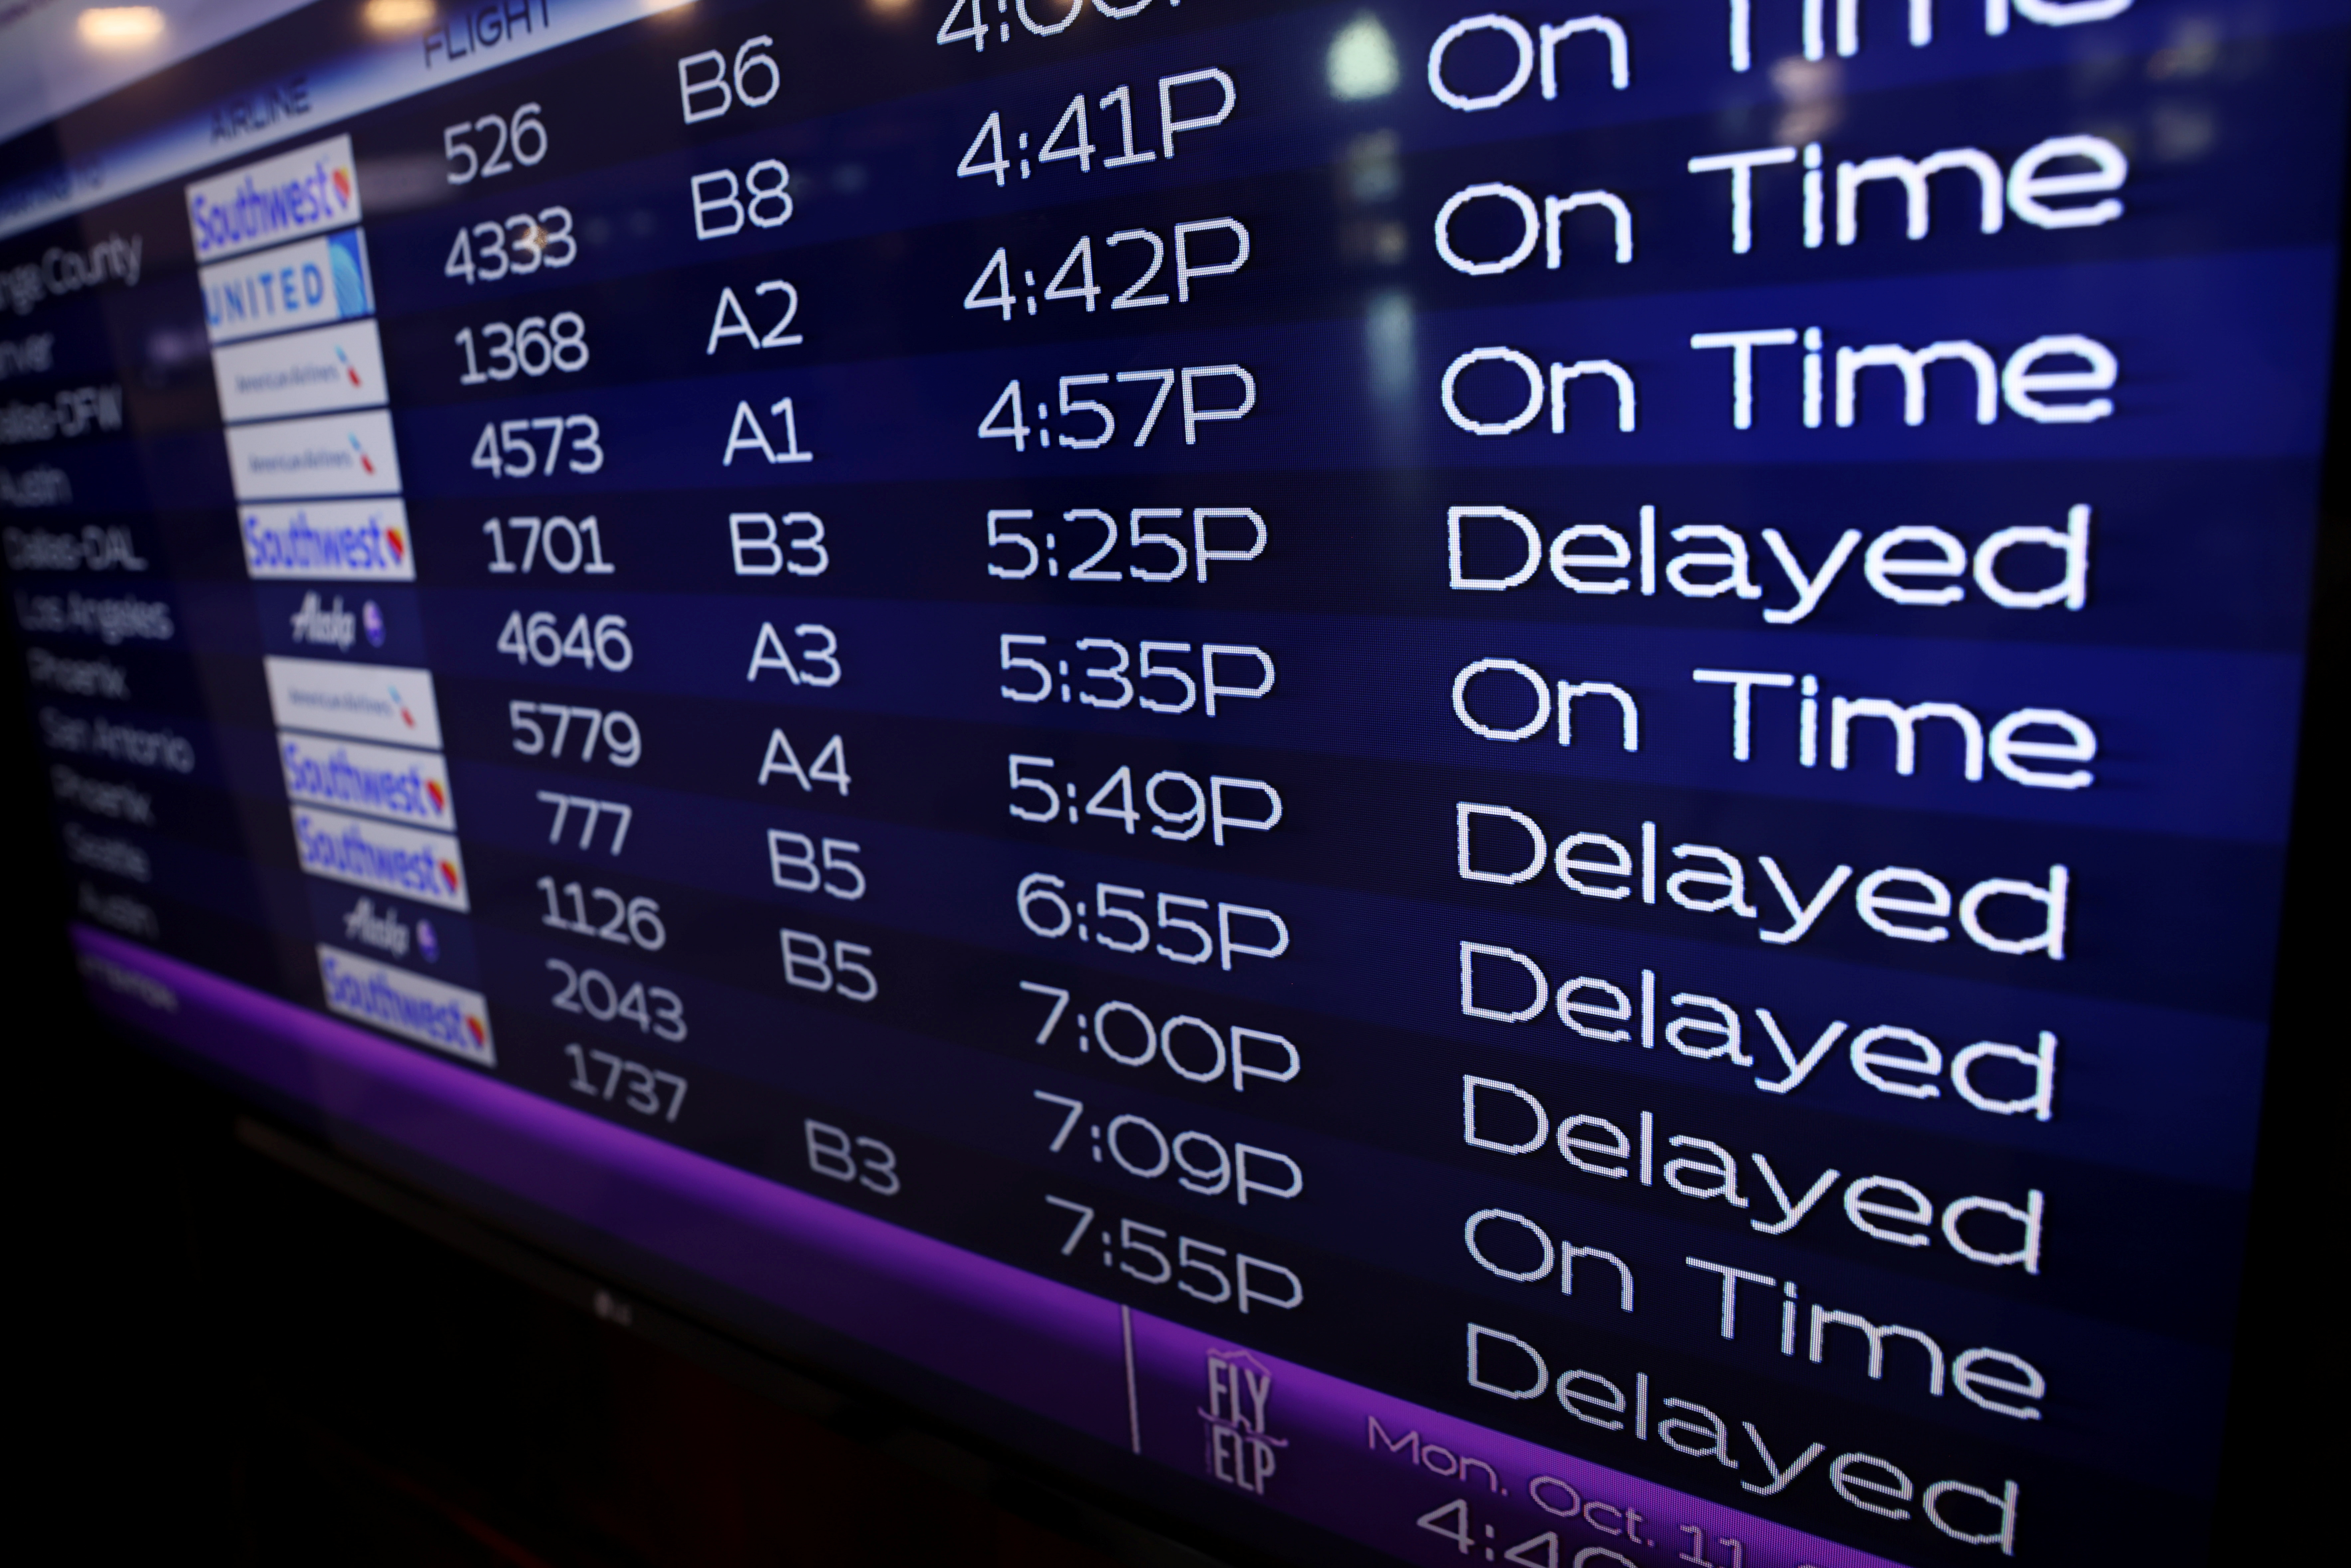 Southwest flight are shown as delayed on the departure screen at the airport in El Paso, Texas, U.S., October 11, 2021.  REUTERS/Mike Blake